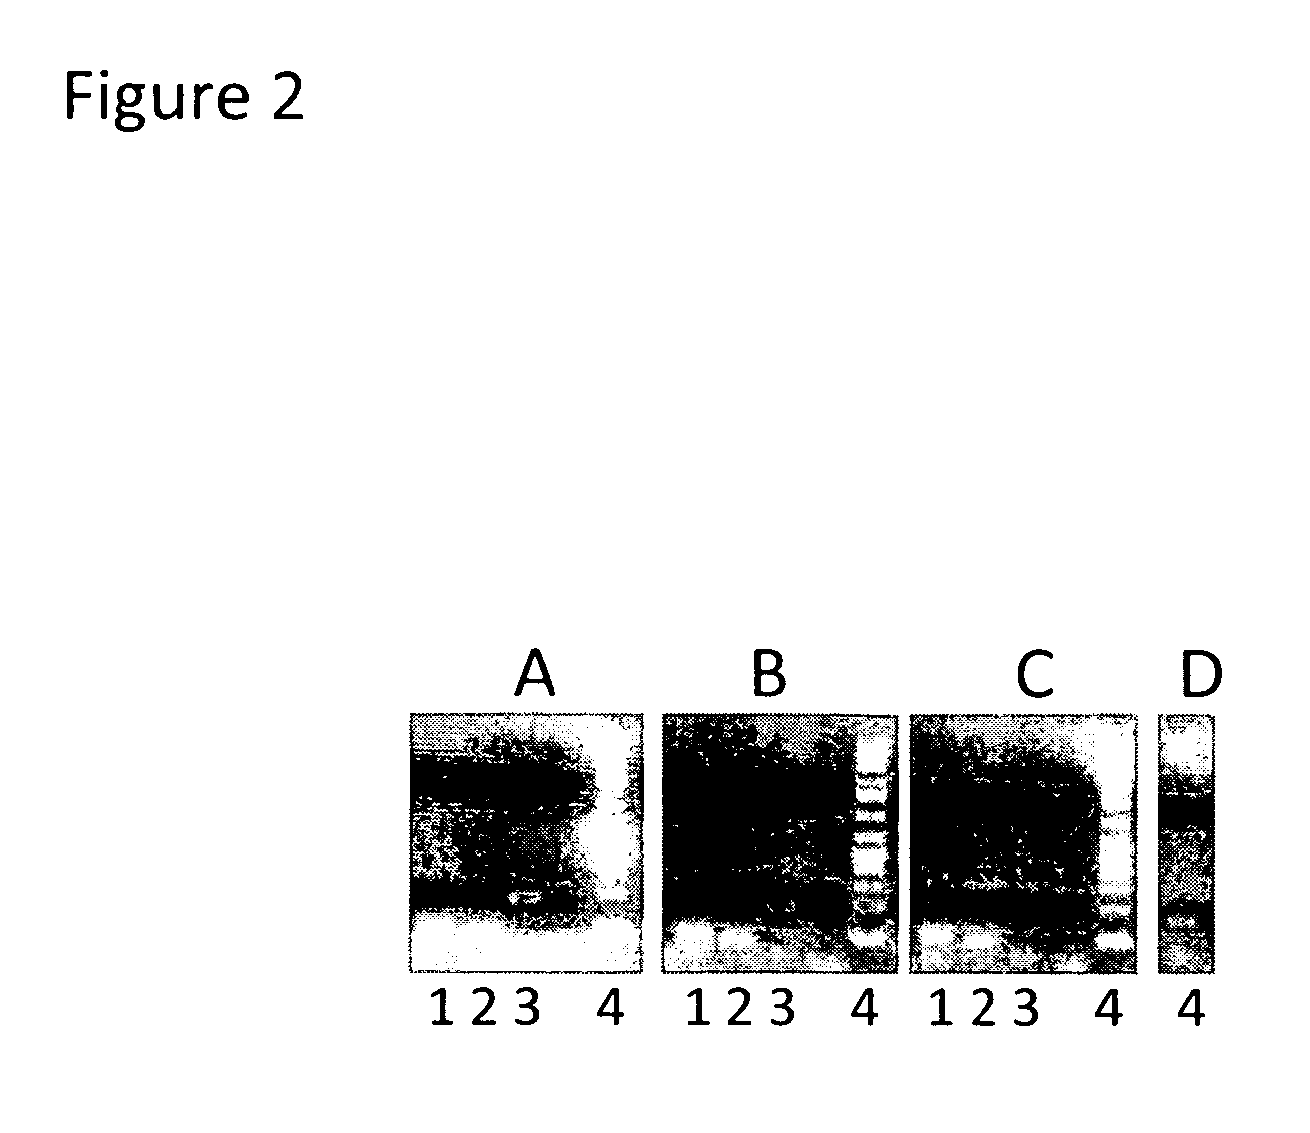 Stress-tolerant plants expressing mannosylglycerate-producing enzymes